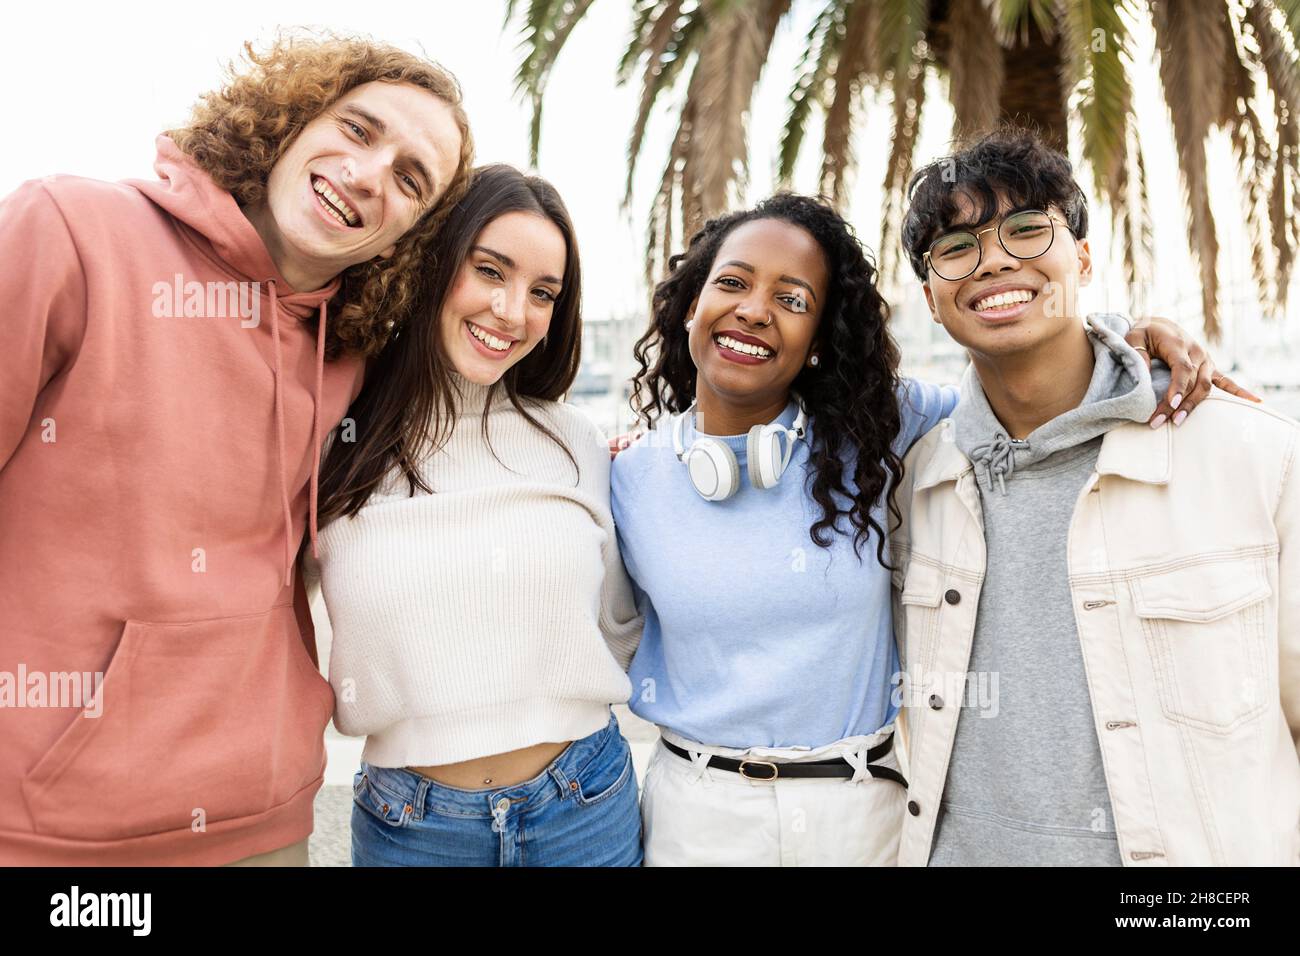 Portrait of united millennial group of friends outdoors Stock Photo